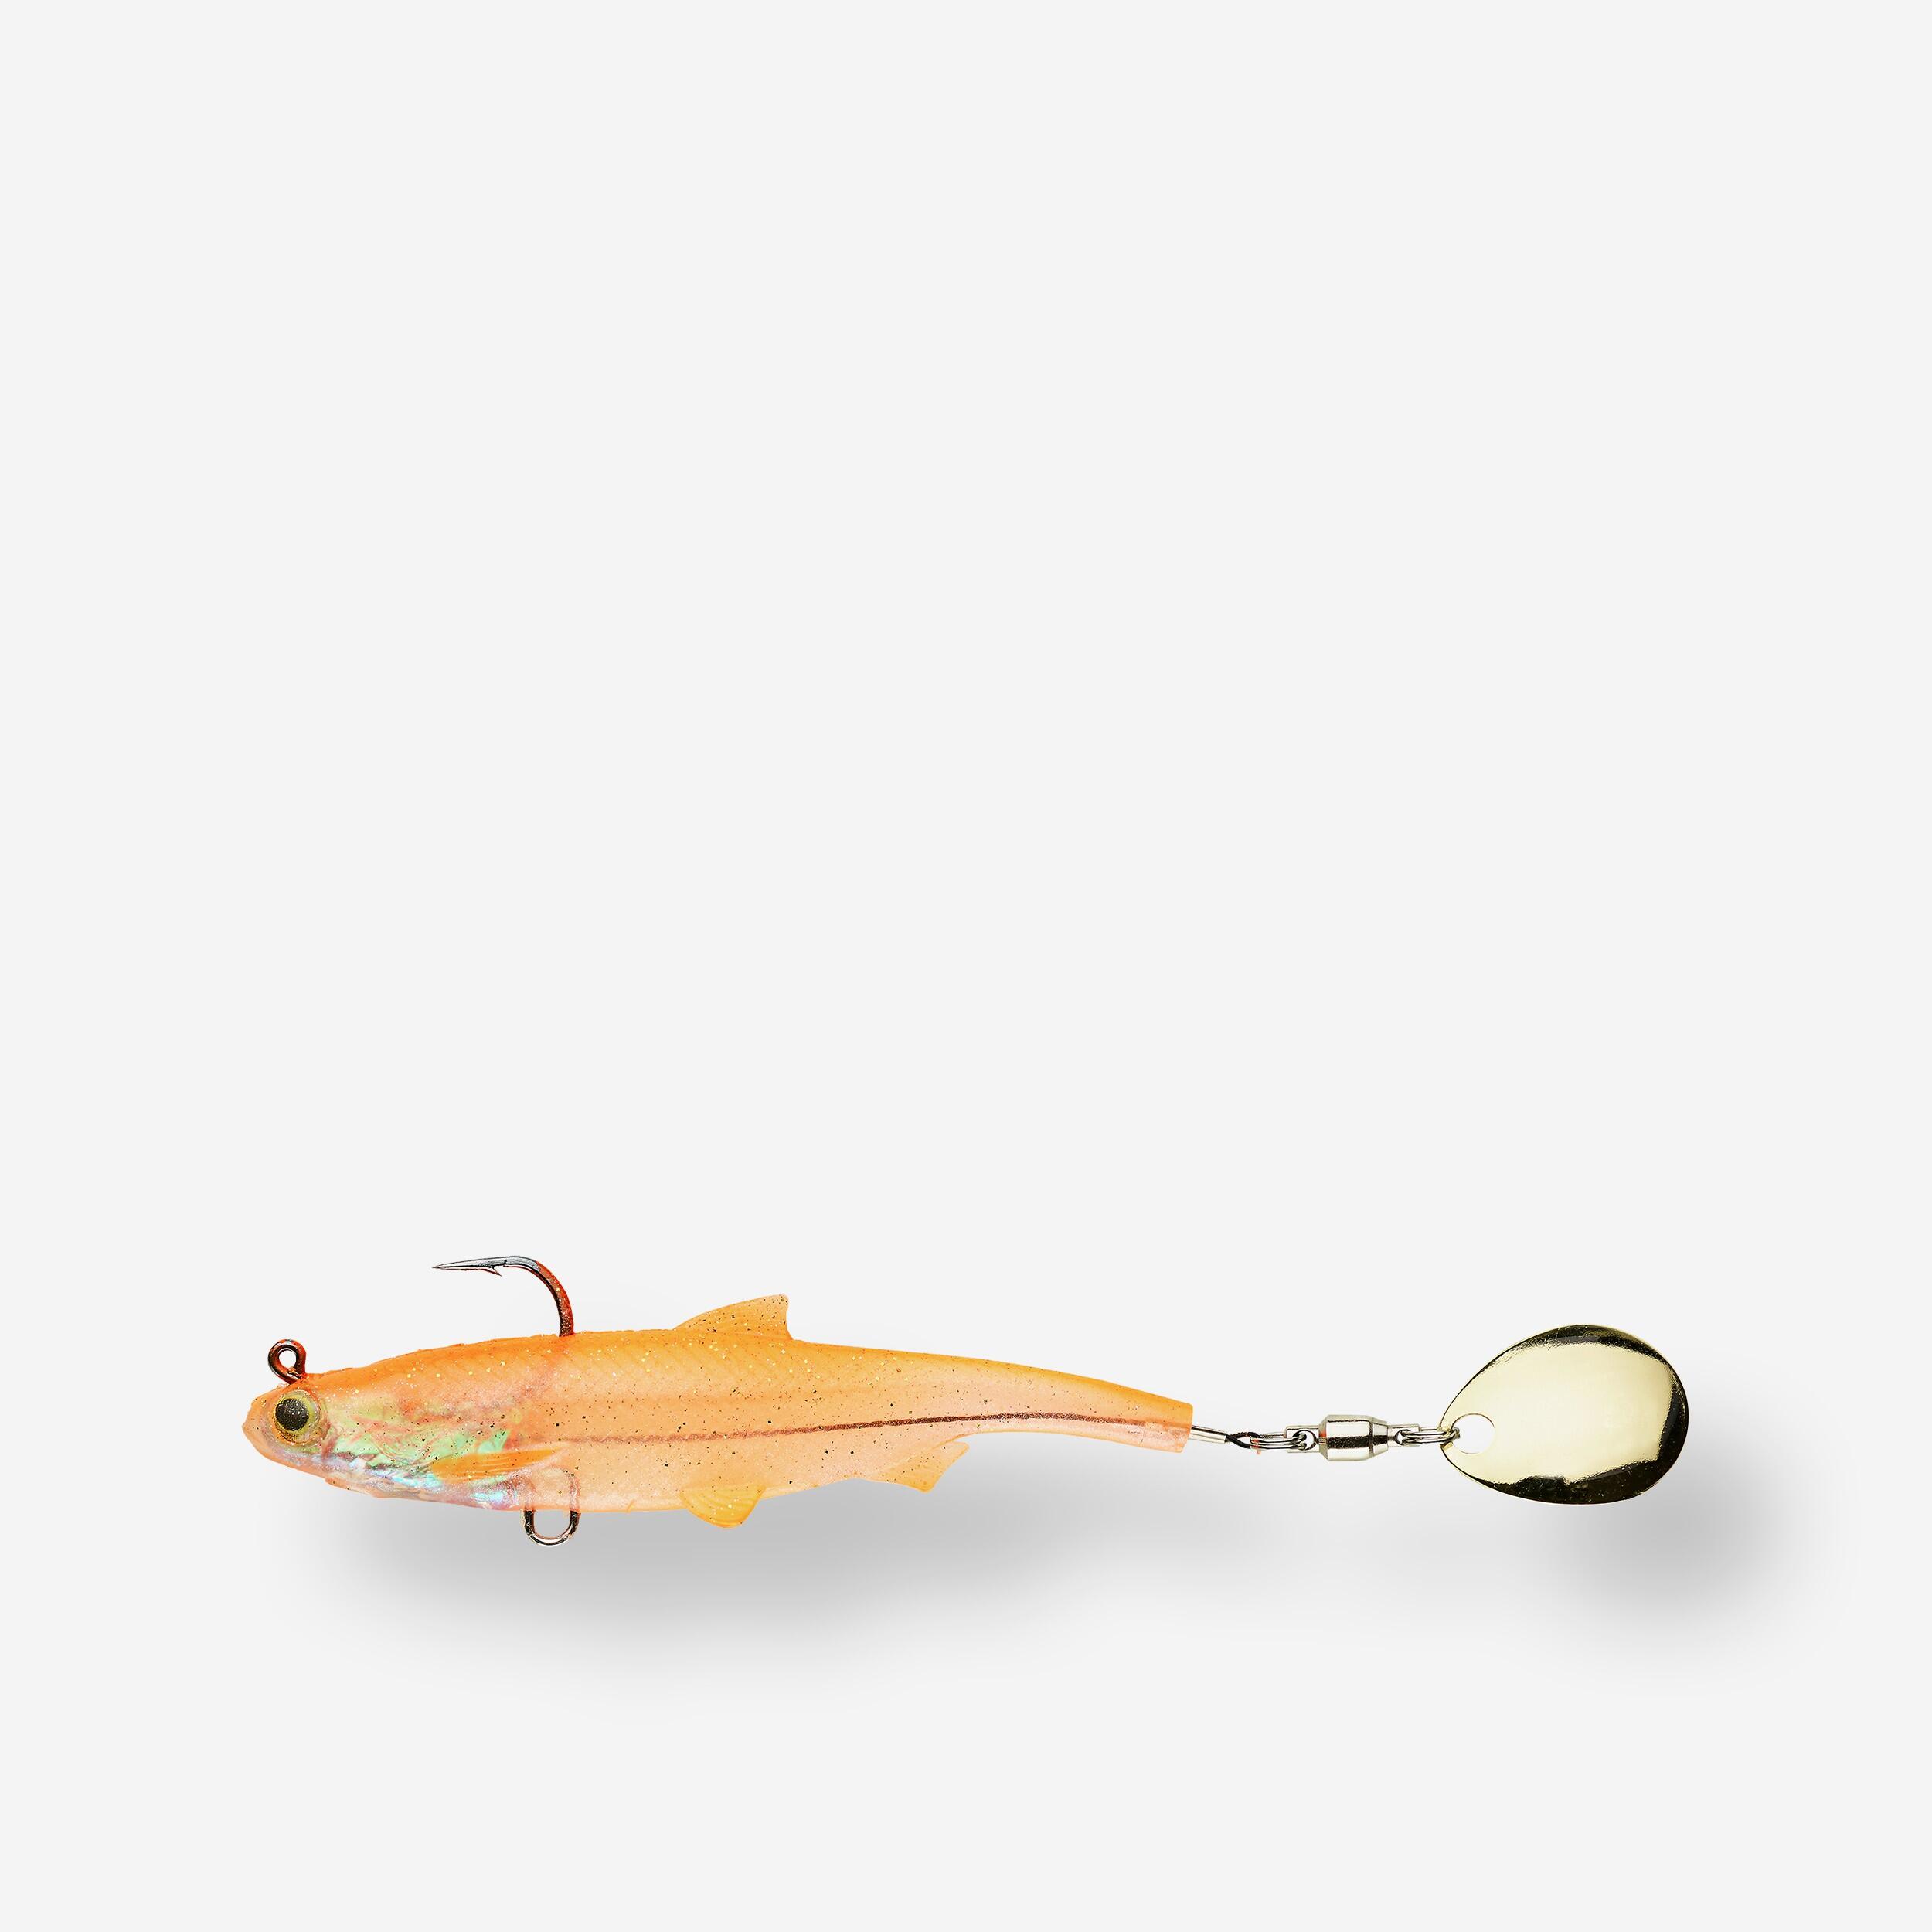 LURE FISHING ROACHSPIN 70 ORANGE BLADED SHAD SOFT LURE 1/2